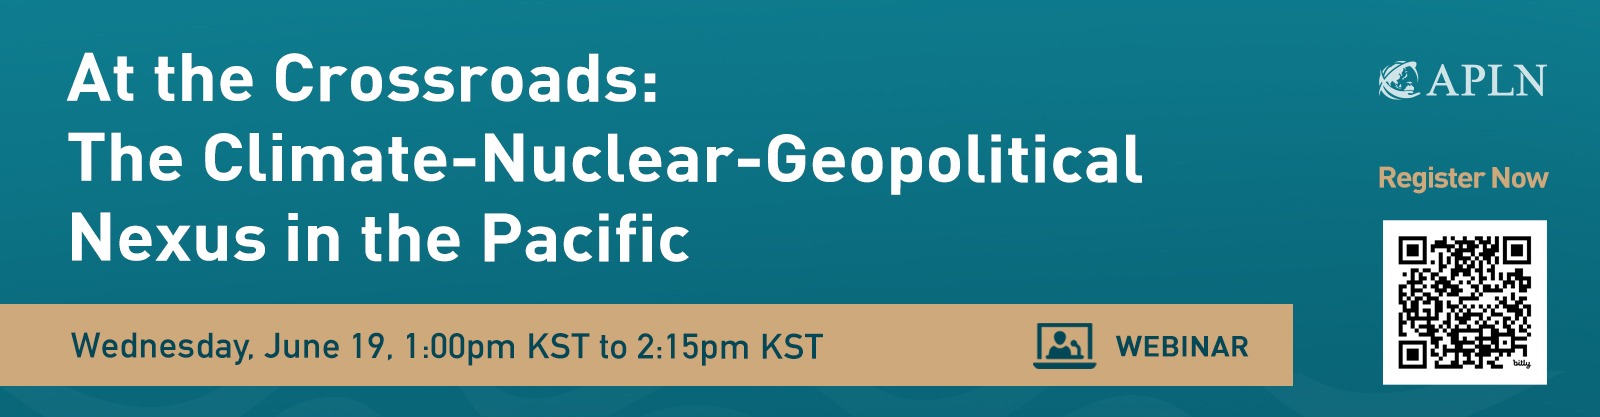 At the Crossroads: The Climate-Nuclear-Geopolitical Nexus in the Pacific